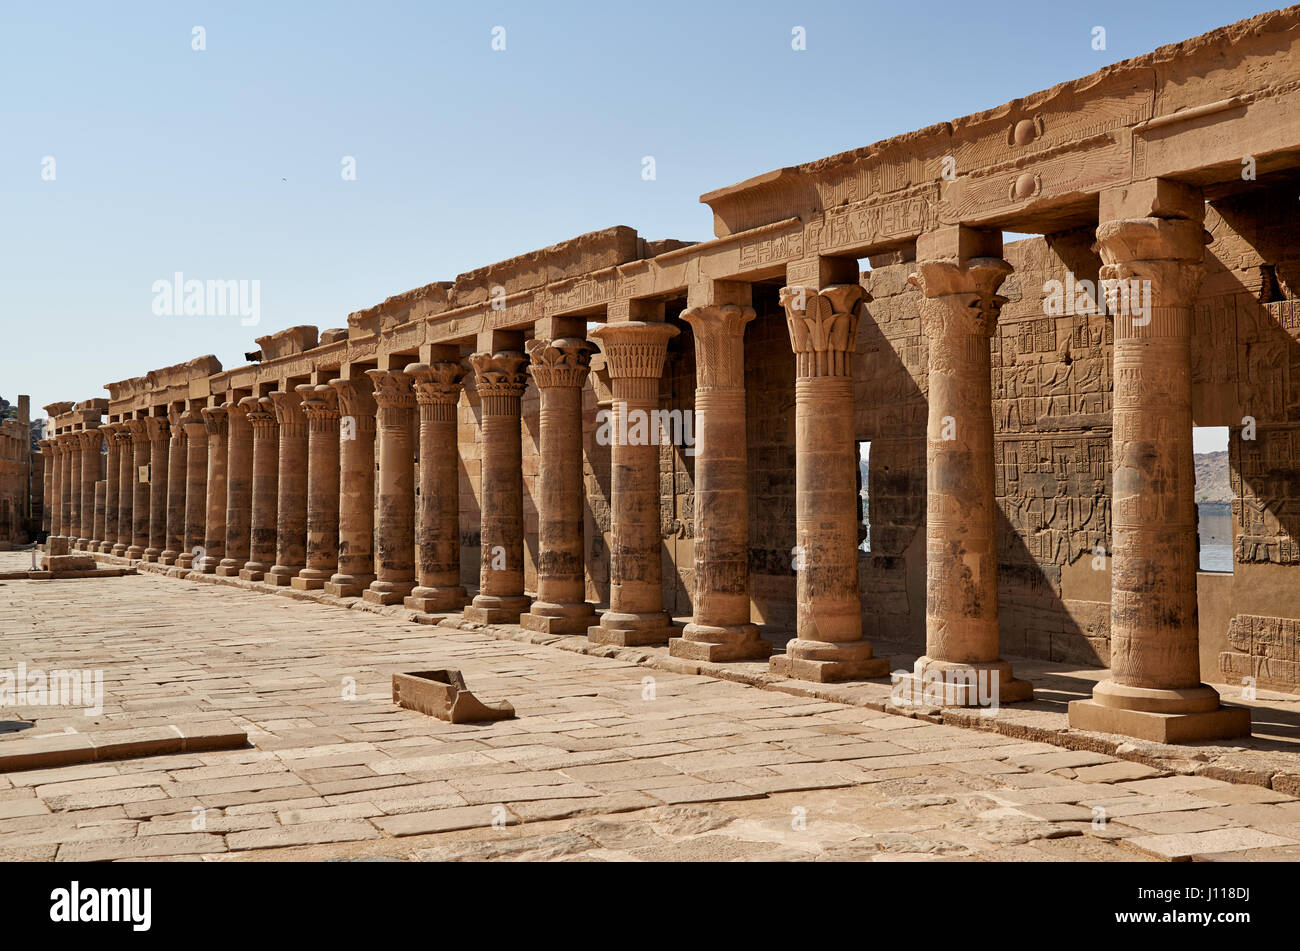 colonnade in ptolemaic temple of Philae, Aswan, Egypt, Africa Stock Photo